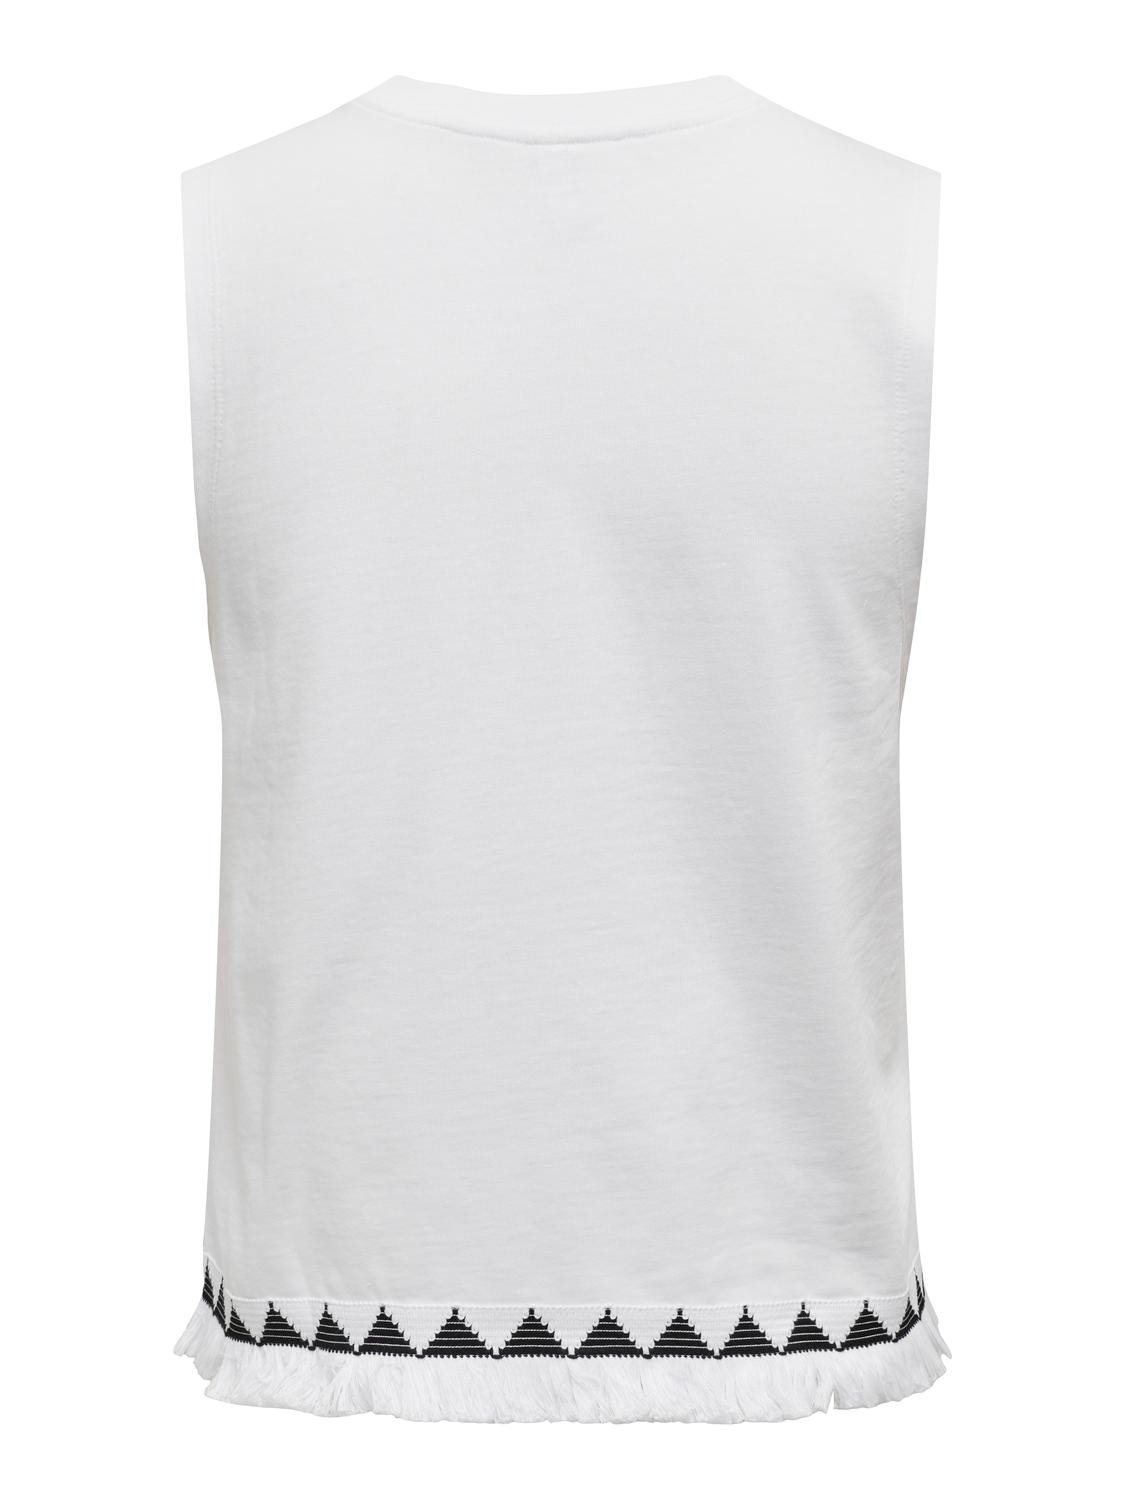 ONLY Regular Fit Round Neck Top -Bright White - 15324501